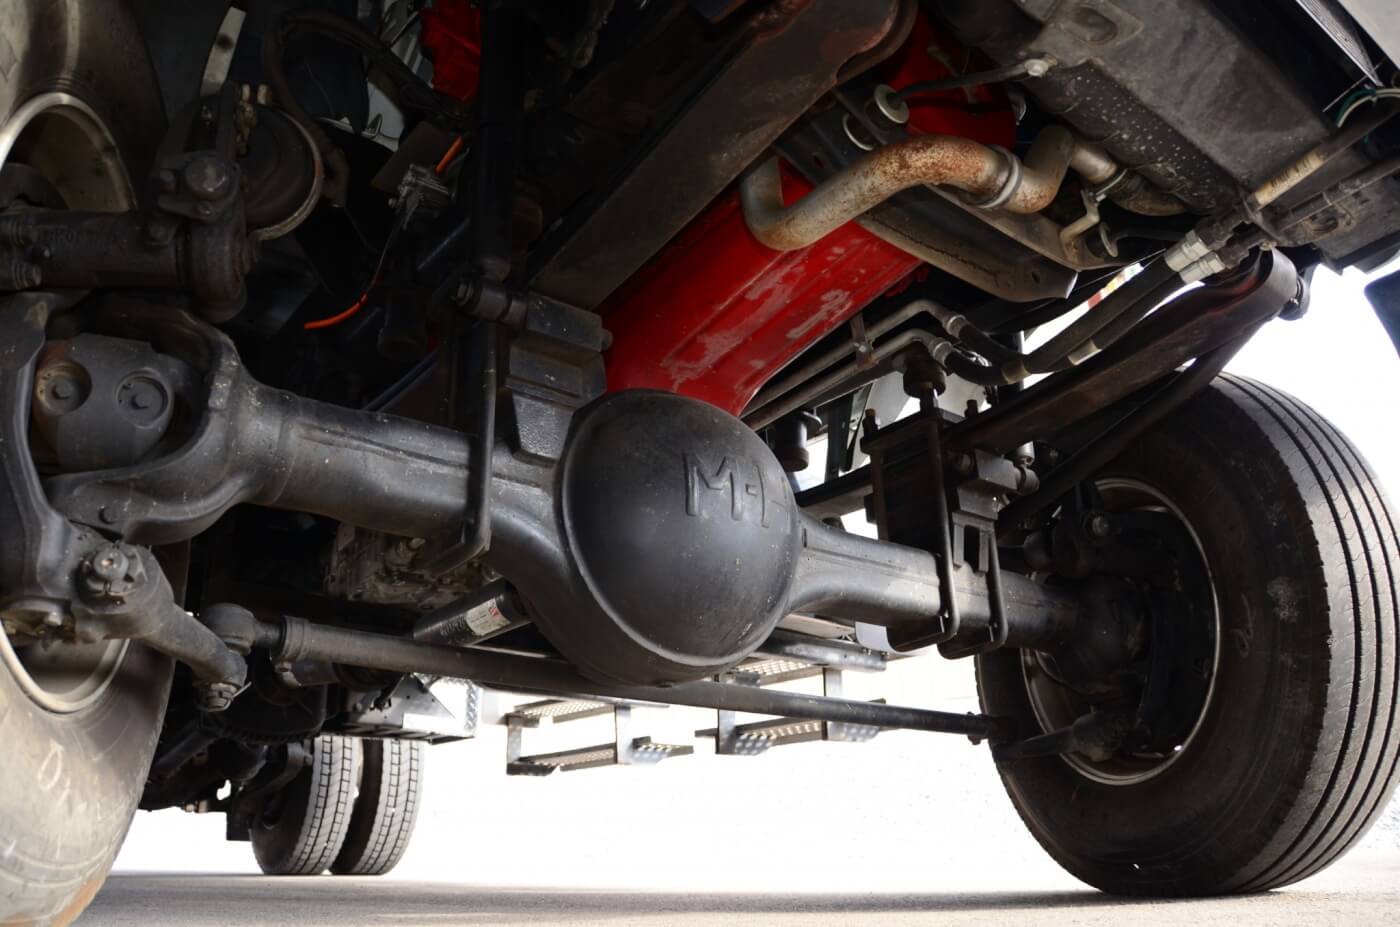 Converting the Ford F-650 to a 4WD setup required a Marmon Herrington front-drive drop axle in a center bowl configuration. 